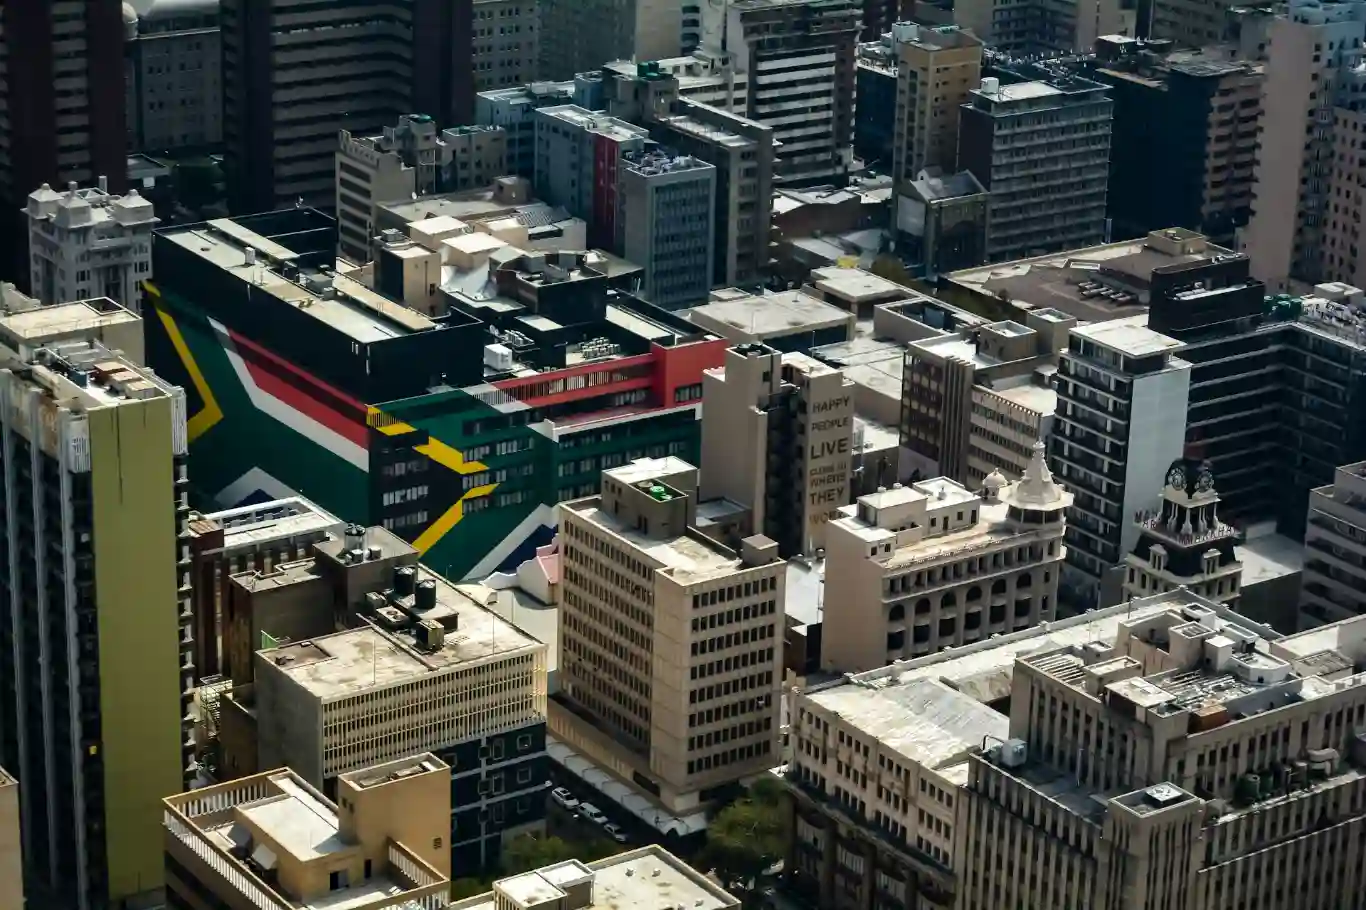 Aerial view of Johannesburg city center with buildings adorned by a large South African flag mural.